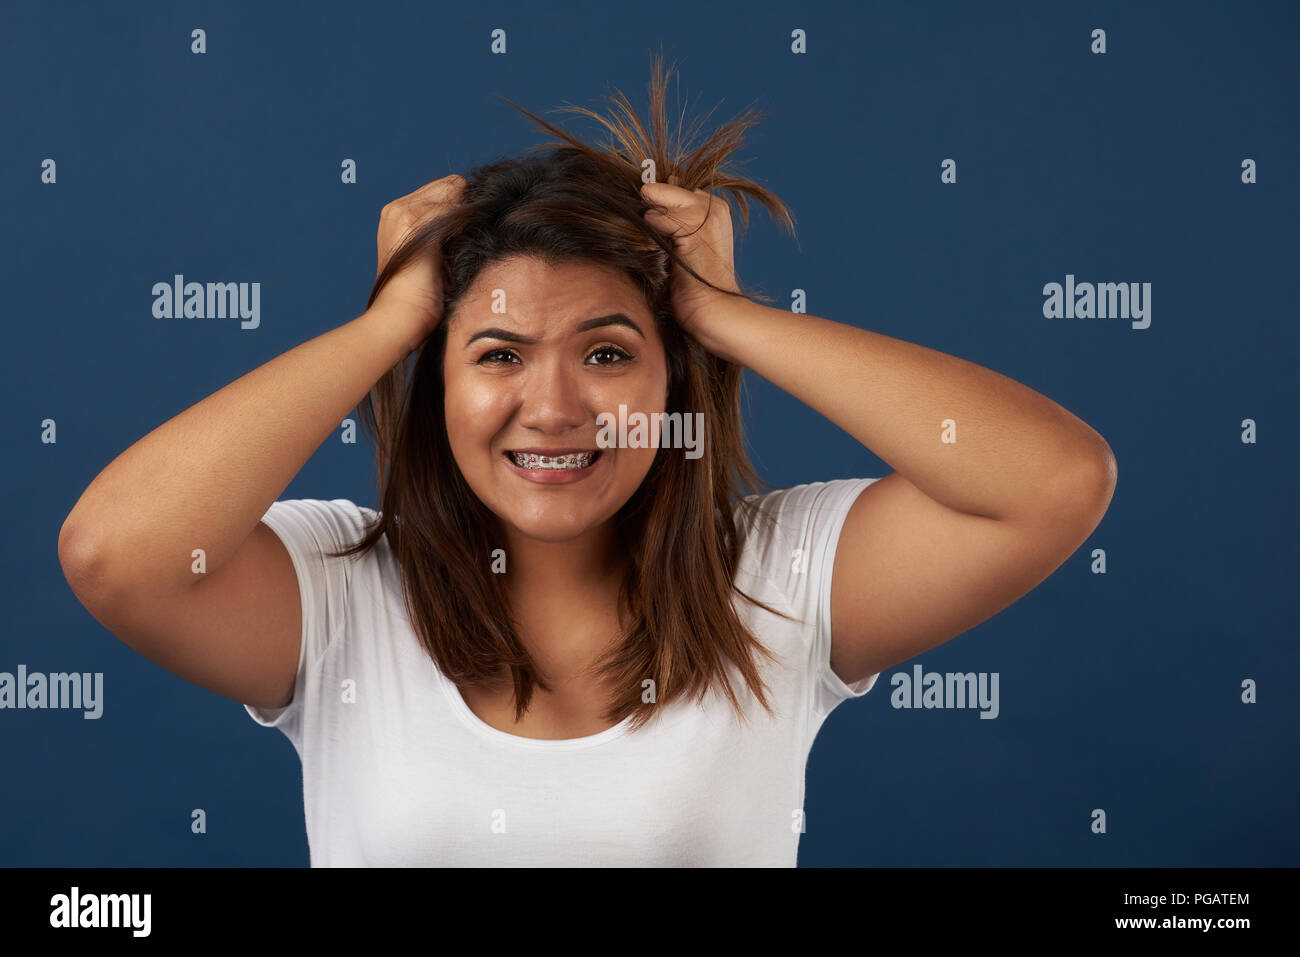 Angry woman emotion theme. Latina girl with hands on messy hair Stock Photo